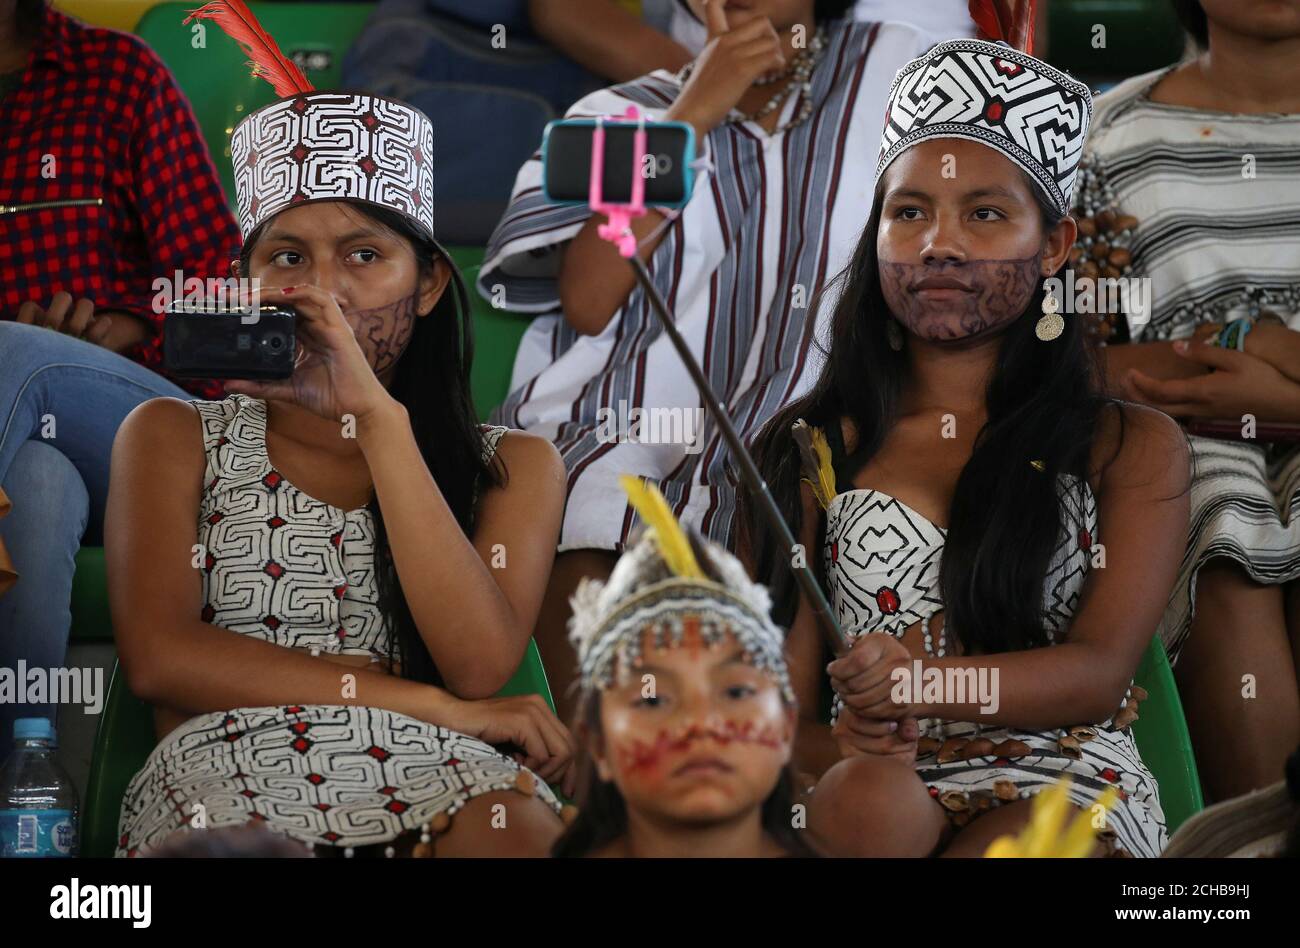 Members of an indigenous group from the Amazon region attend a meeting with Pope Francis at the Coliseo Regional Madre de Dios in Puerto Maldonado, Peru, January 19, 2018. REUTERS/Alessandro Bianchi Stock Photo